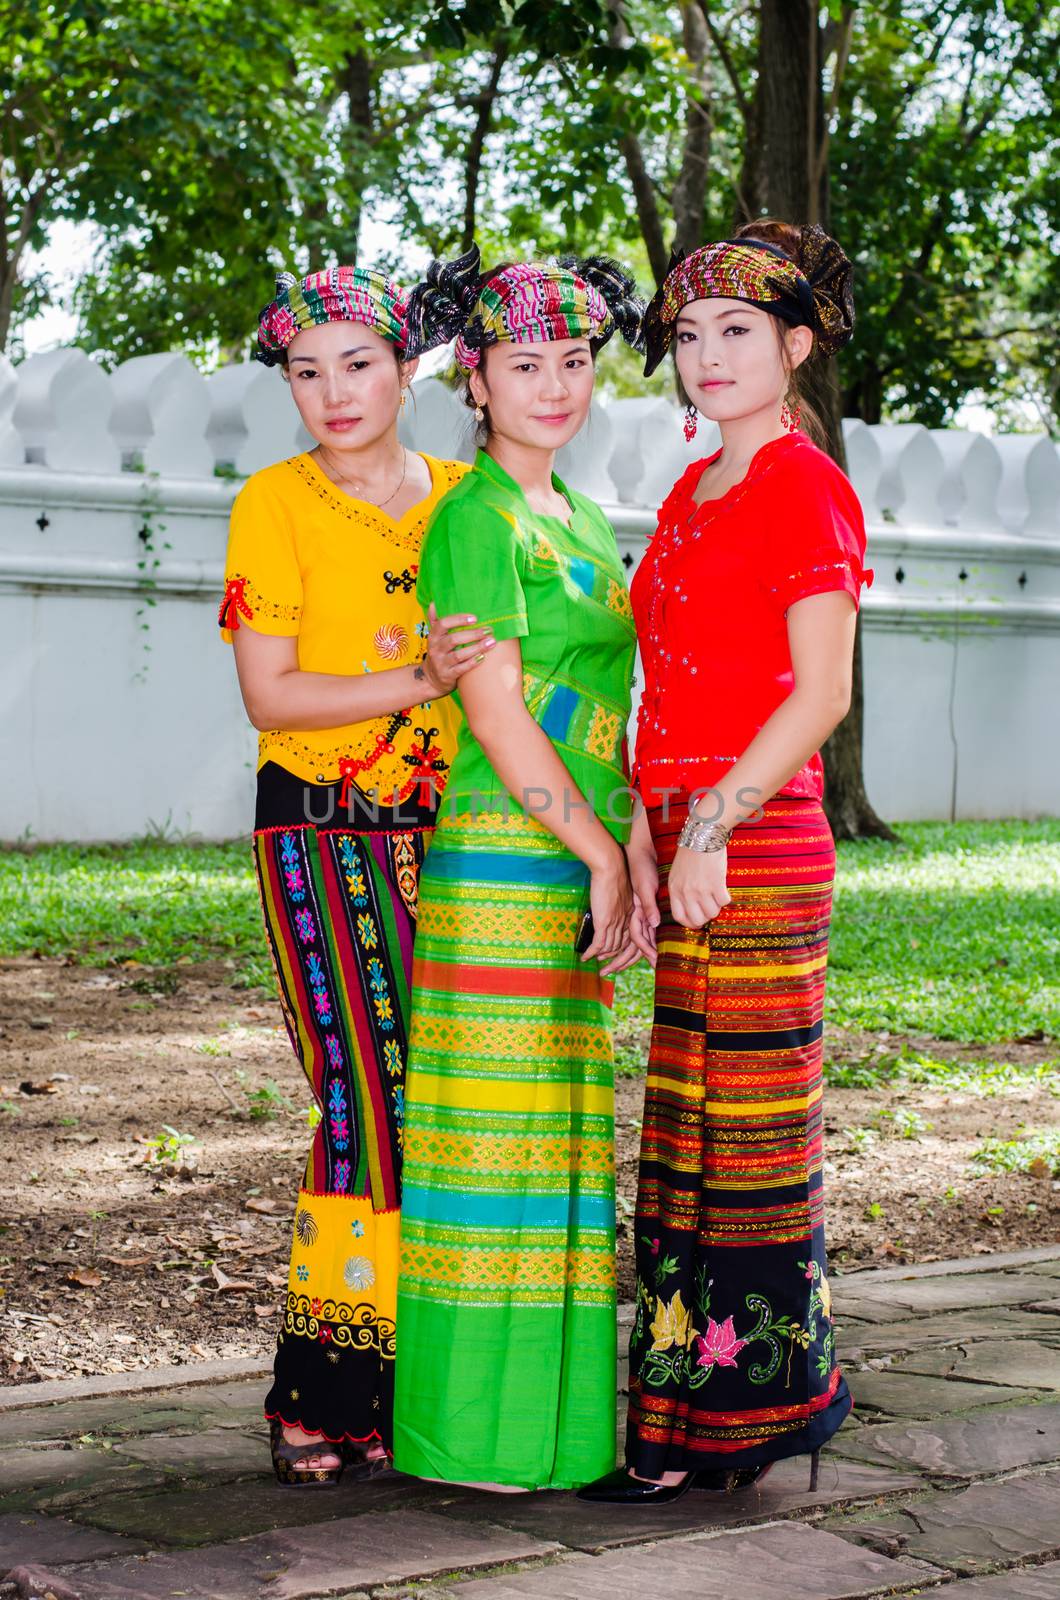 BANGKOK -THAILAND NOVEMBER 2: Unidentified Tai Yai (ethnic group living in parts of Myanmar and Thailand) in Tribal dress for photograph at on November 2, 2014 in Bangkok,Thailand.